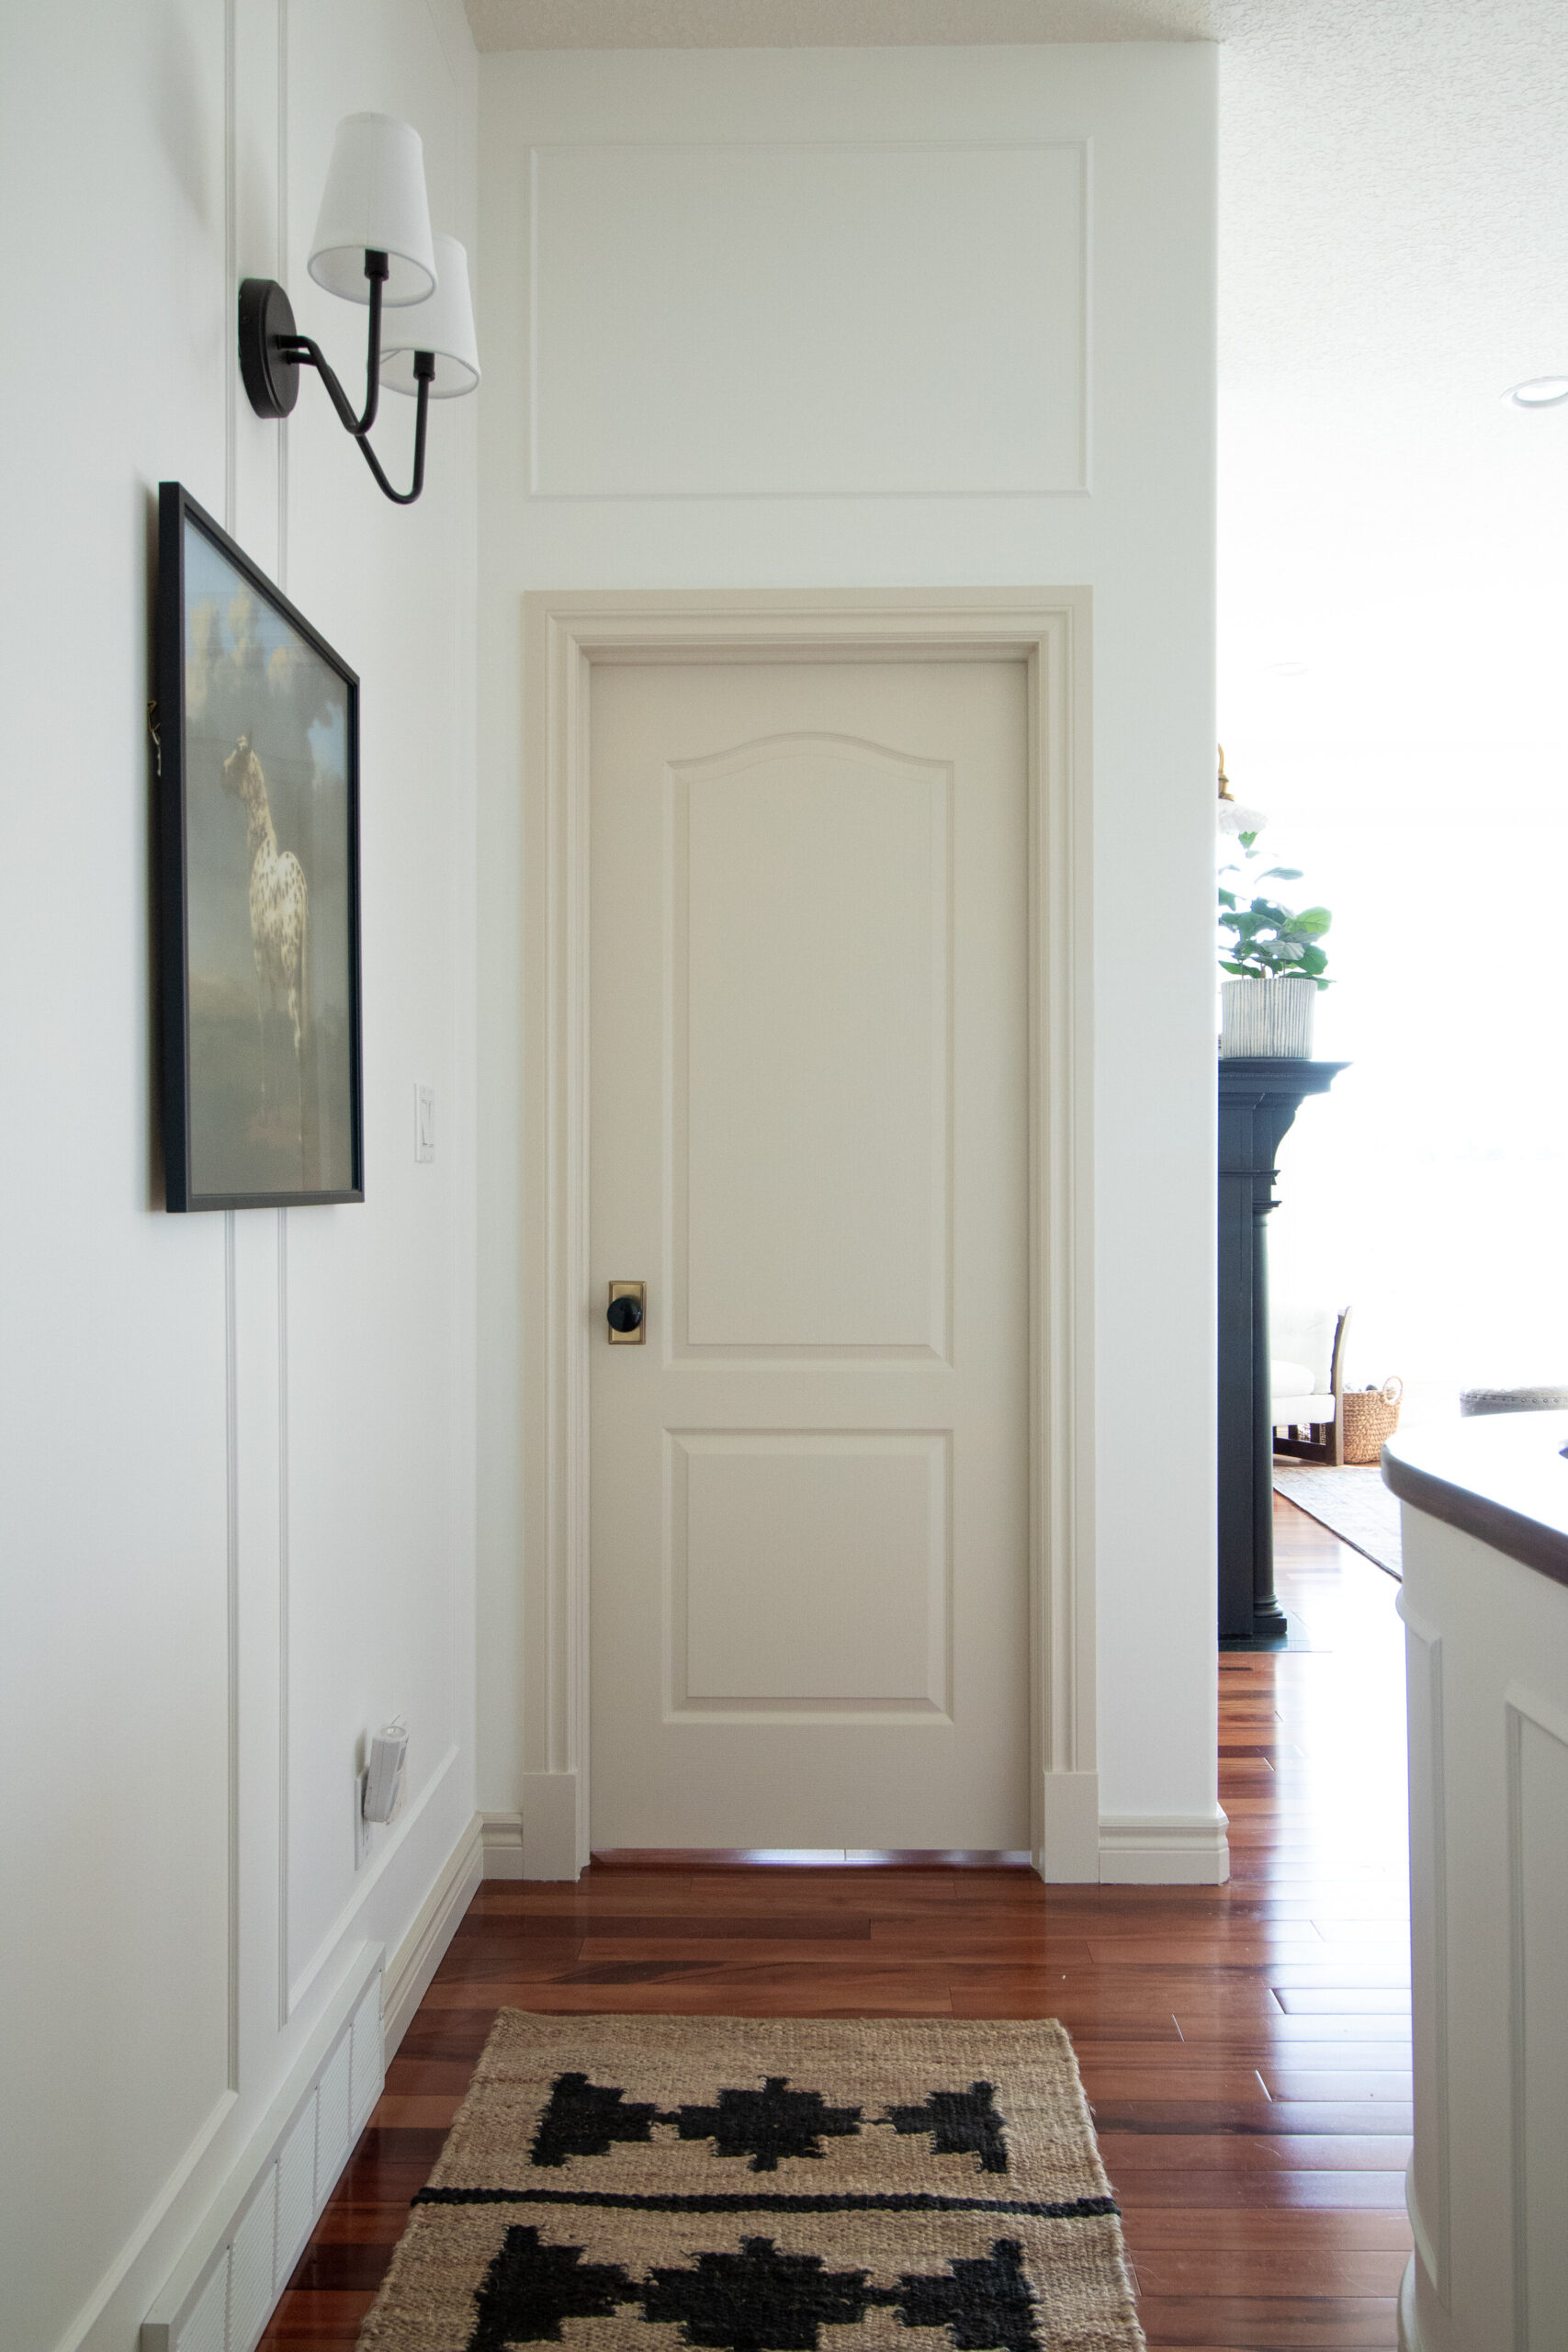 door showing box trim moulding installed above the door in line with the door casing even though that is not centered on the wall.  Jute runner and white walls with contrast trim 